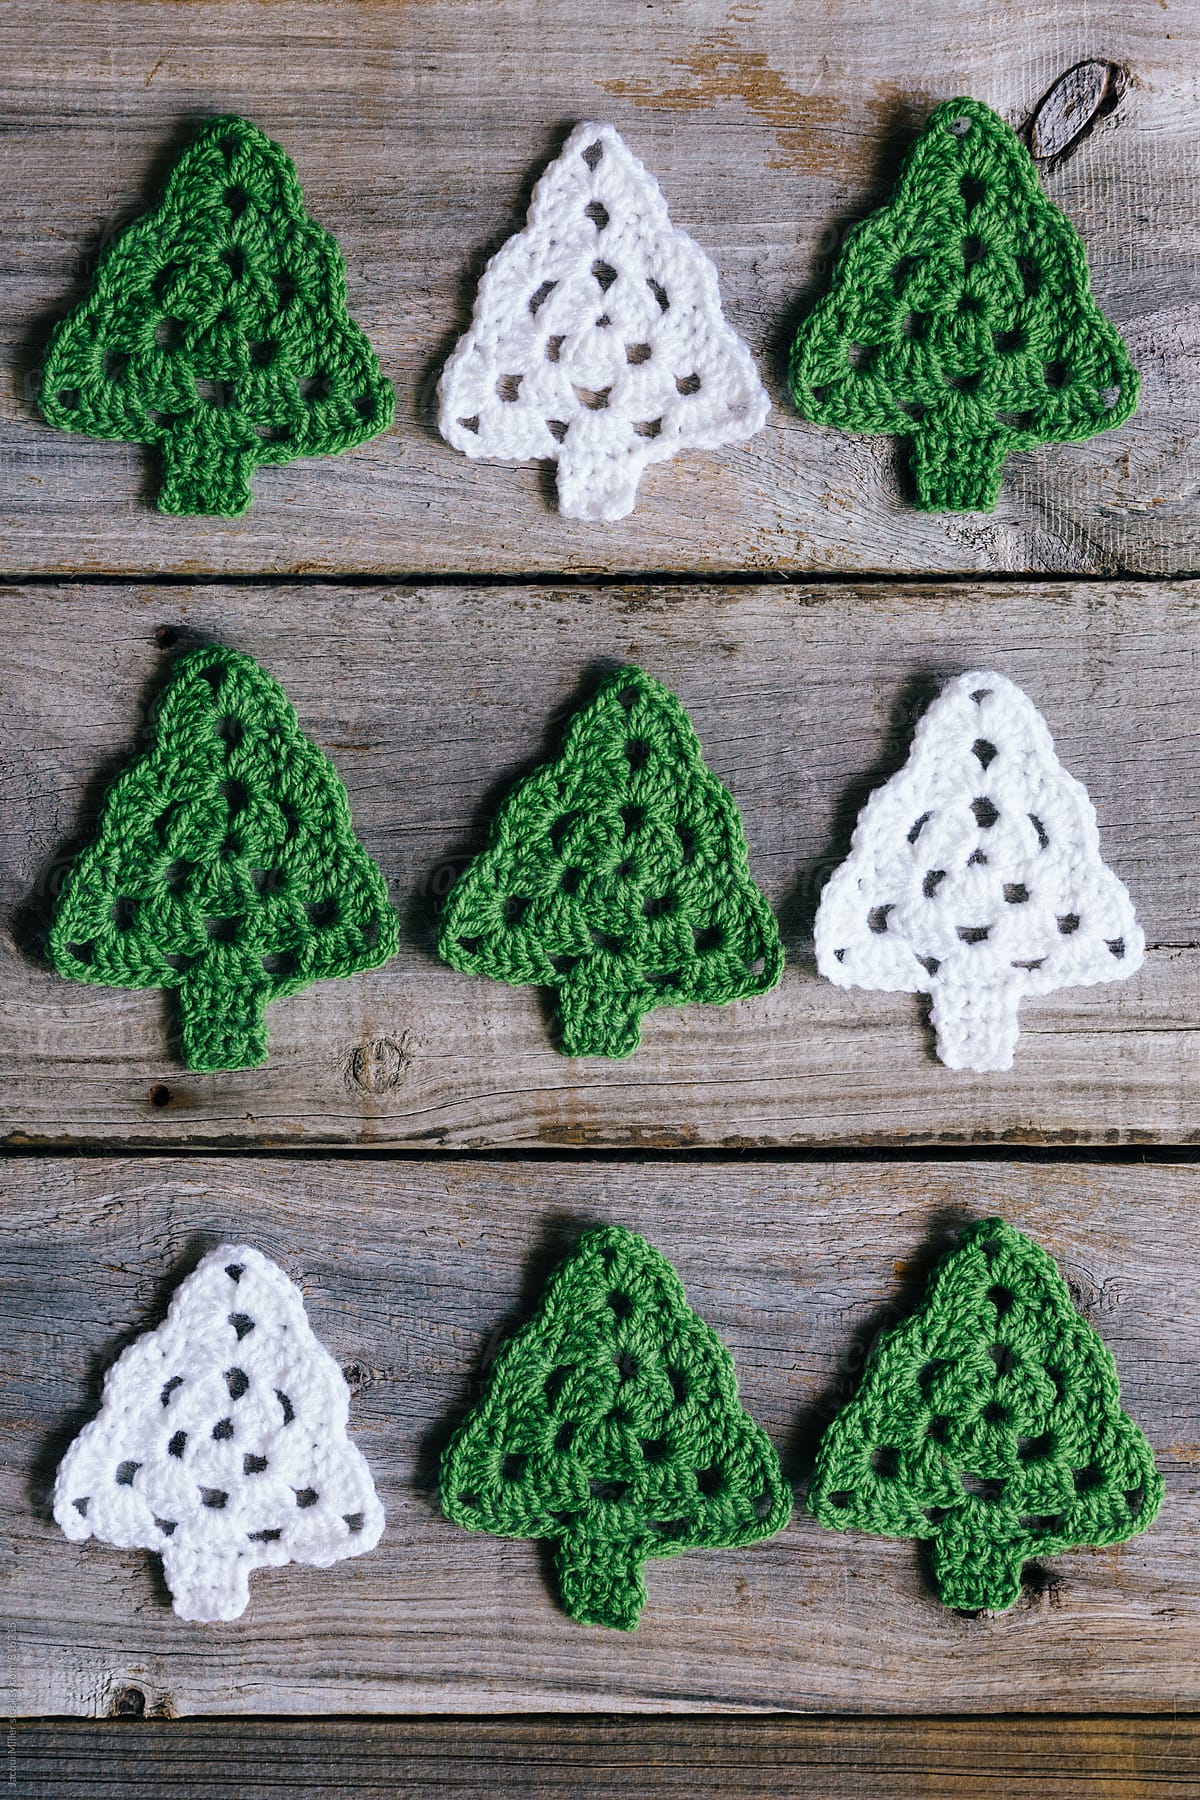 Green and White Crocheted Christmas Trees on rustic wood background - vertical